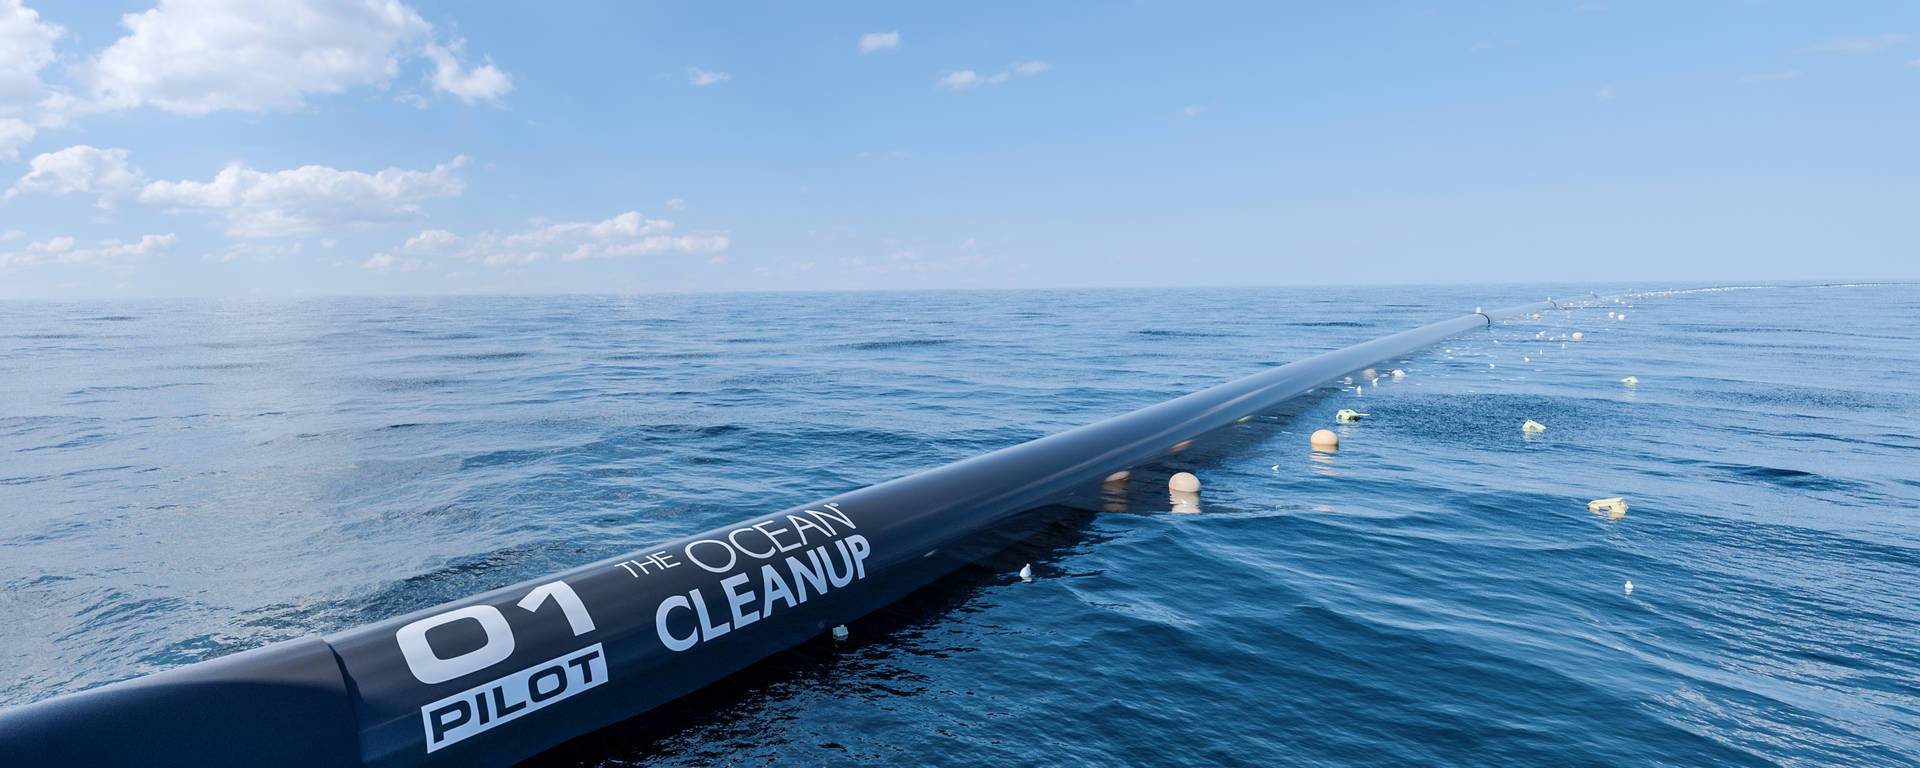 A giant, floating trash can is going to clean up our oceans